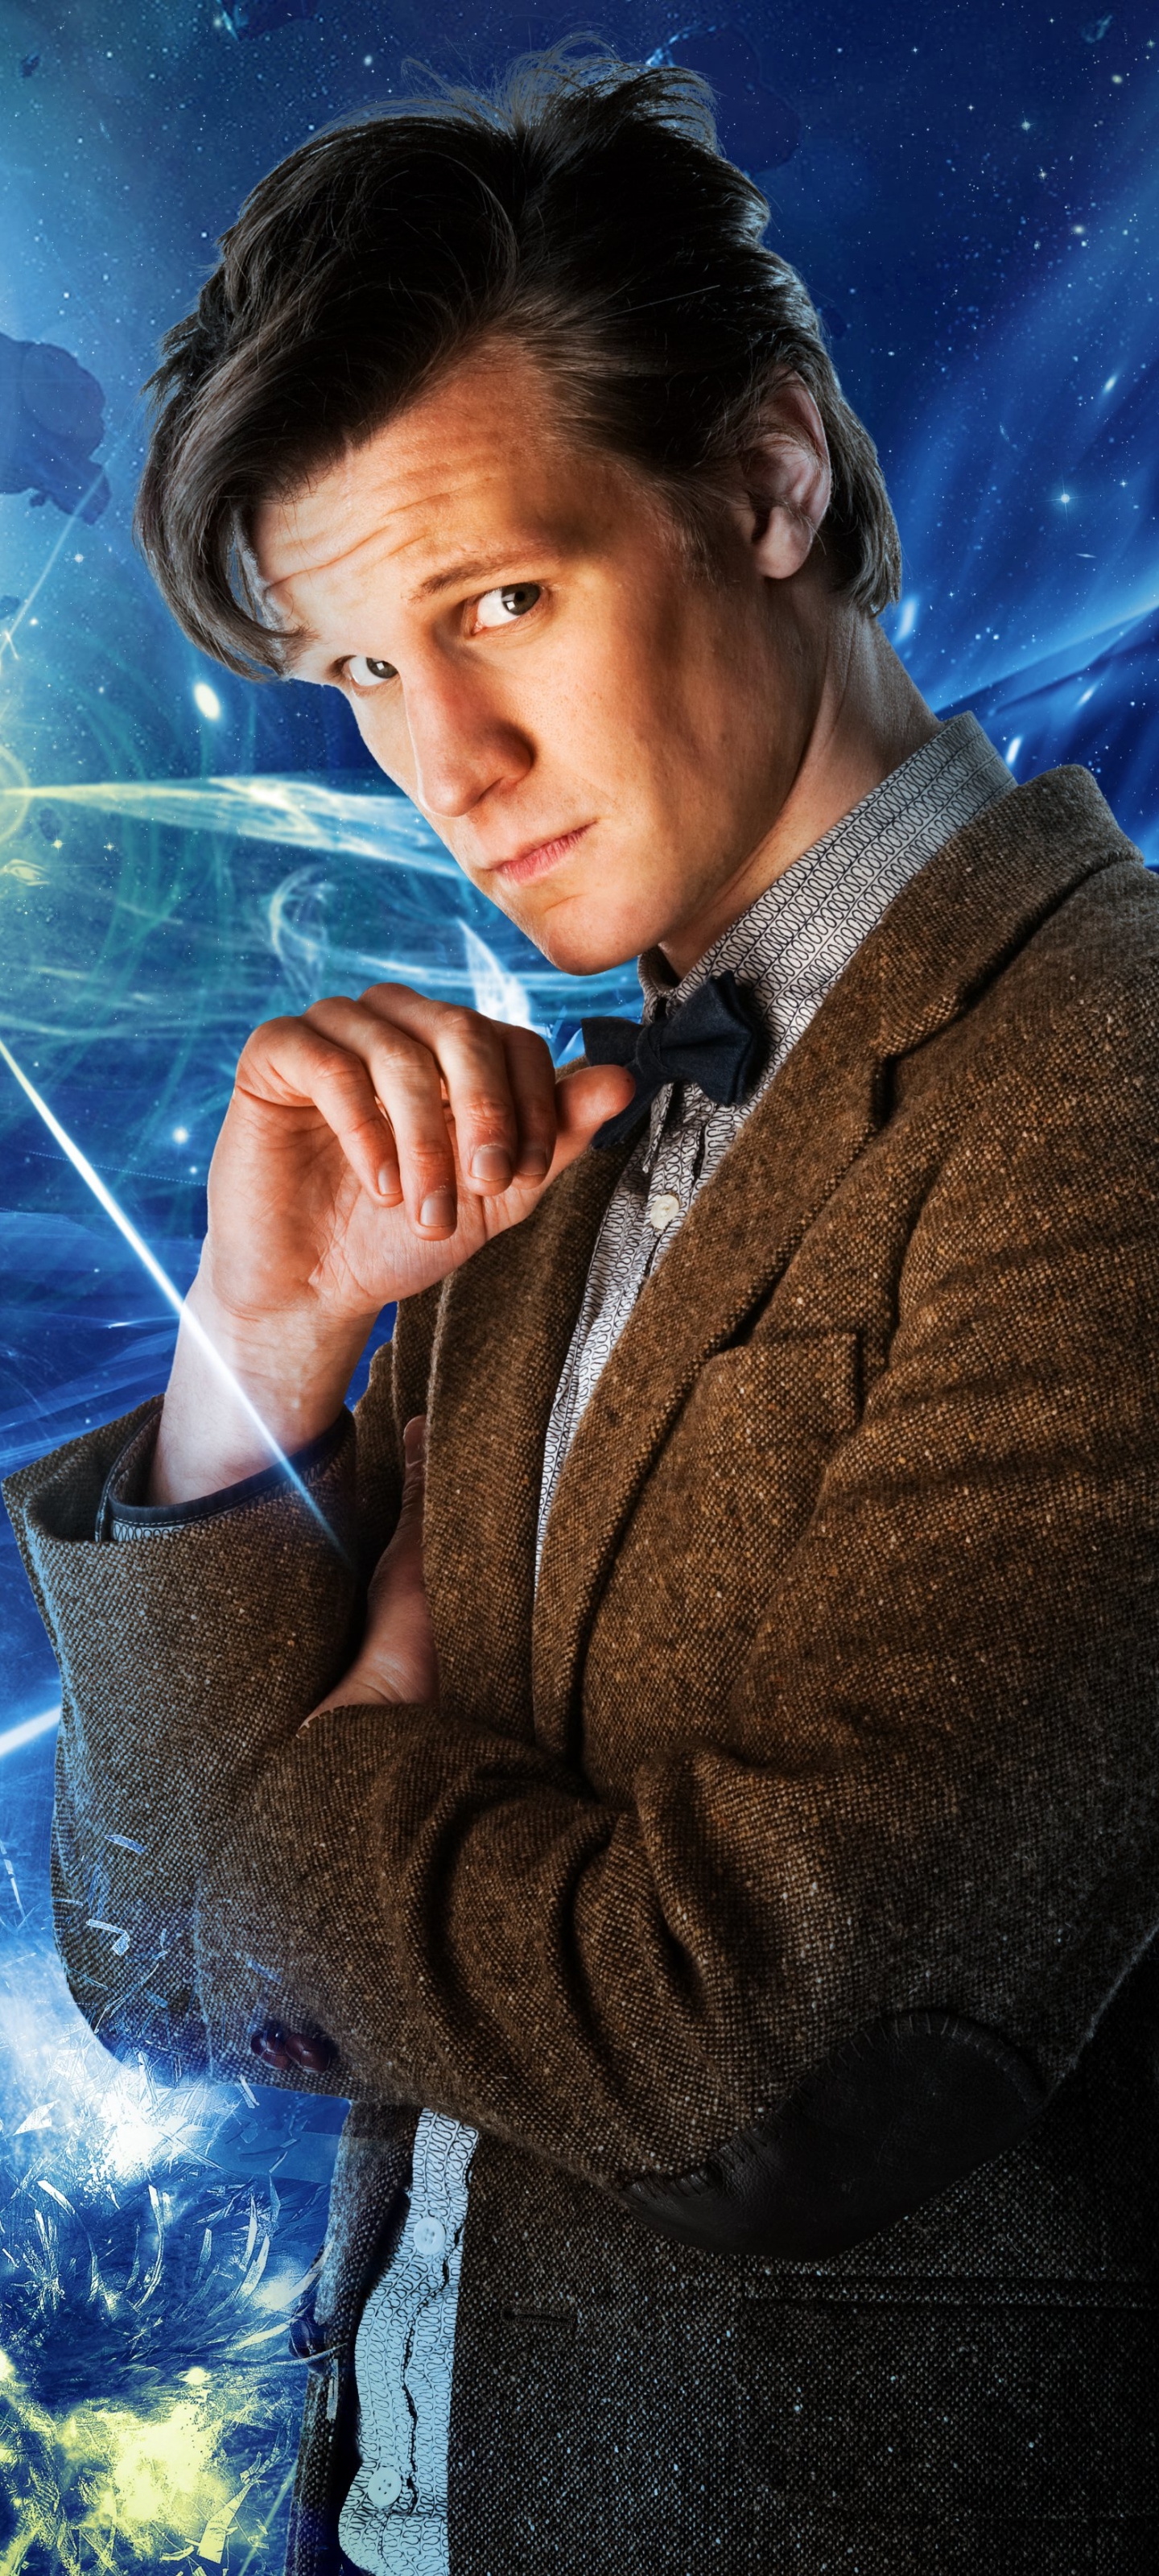 Doctor Who Phone Wallpaper